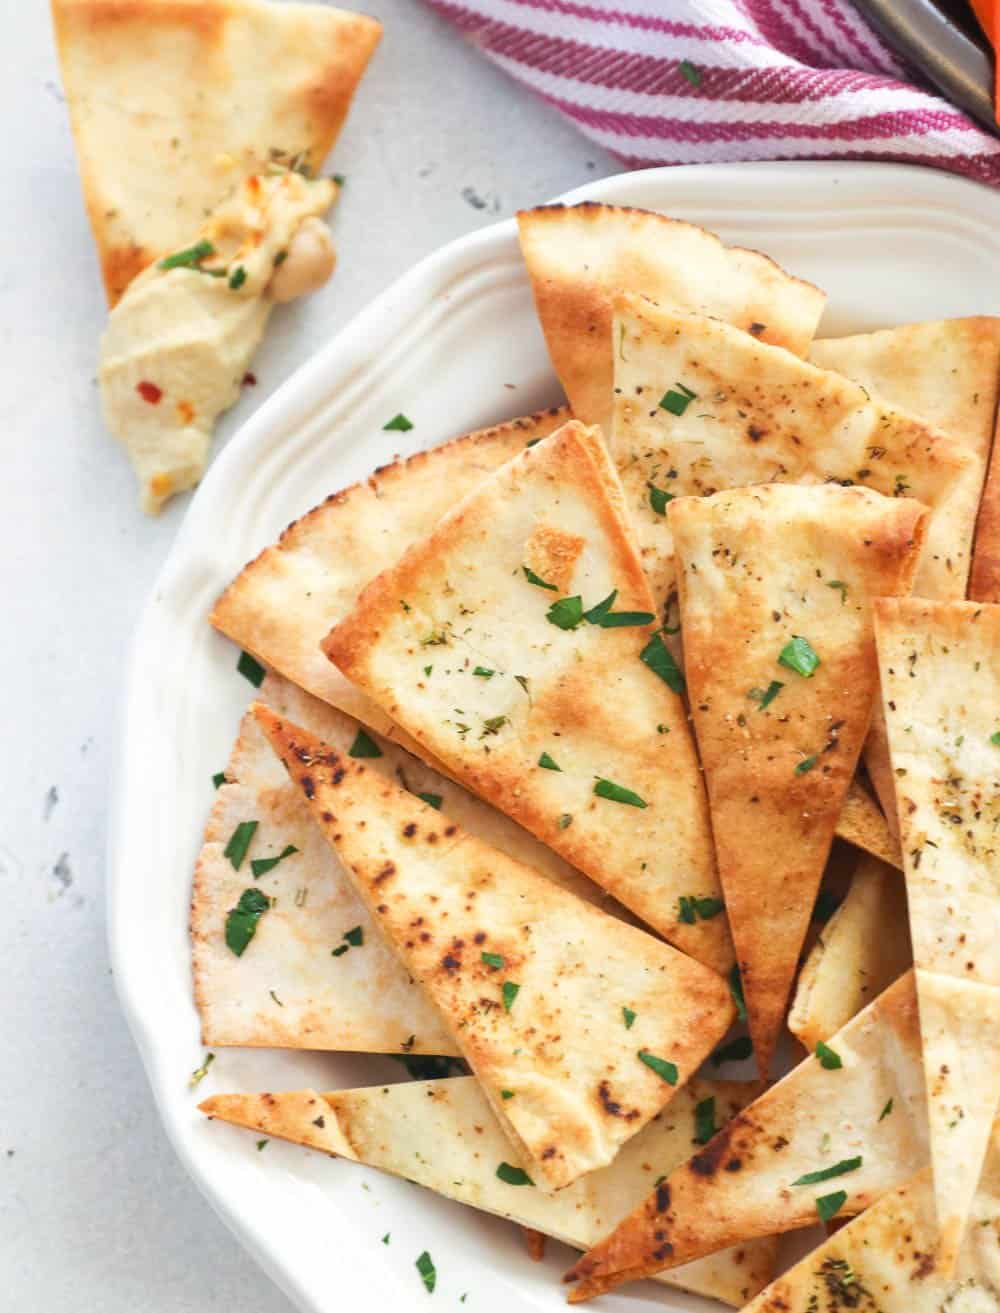 A plateful of freshly made pita chips